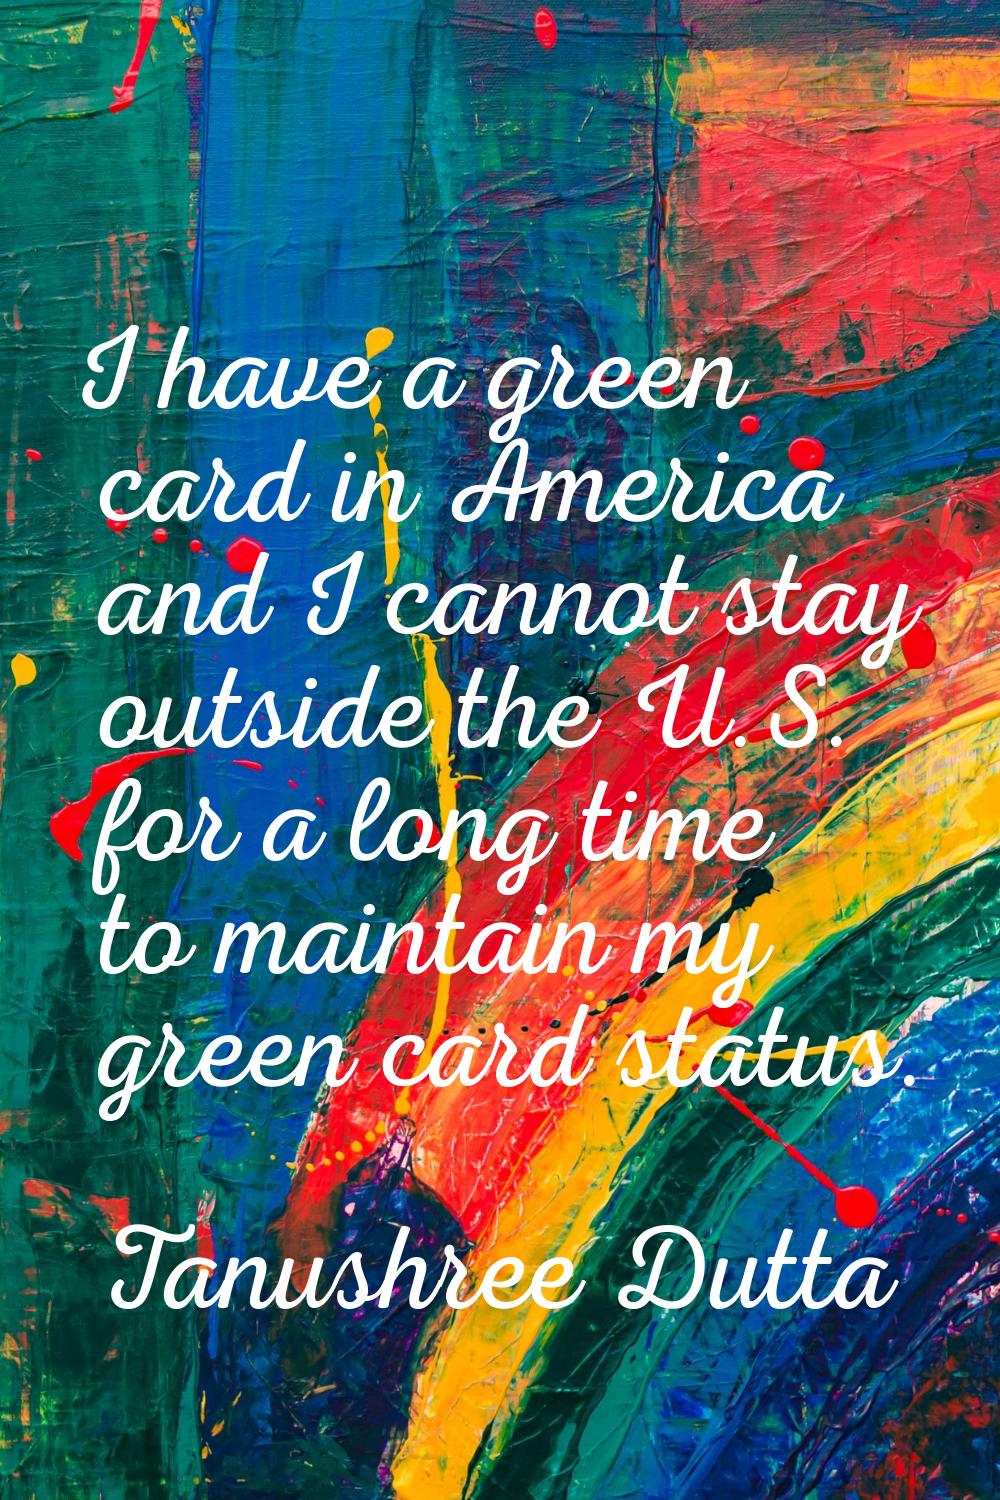 I have a green card in America and I cannot stay outside the U.S. for a long time to maintain my gr